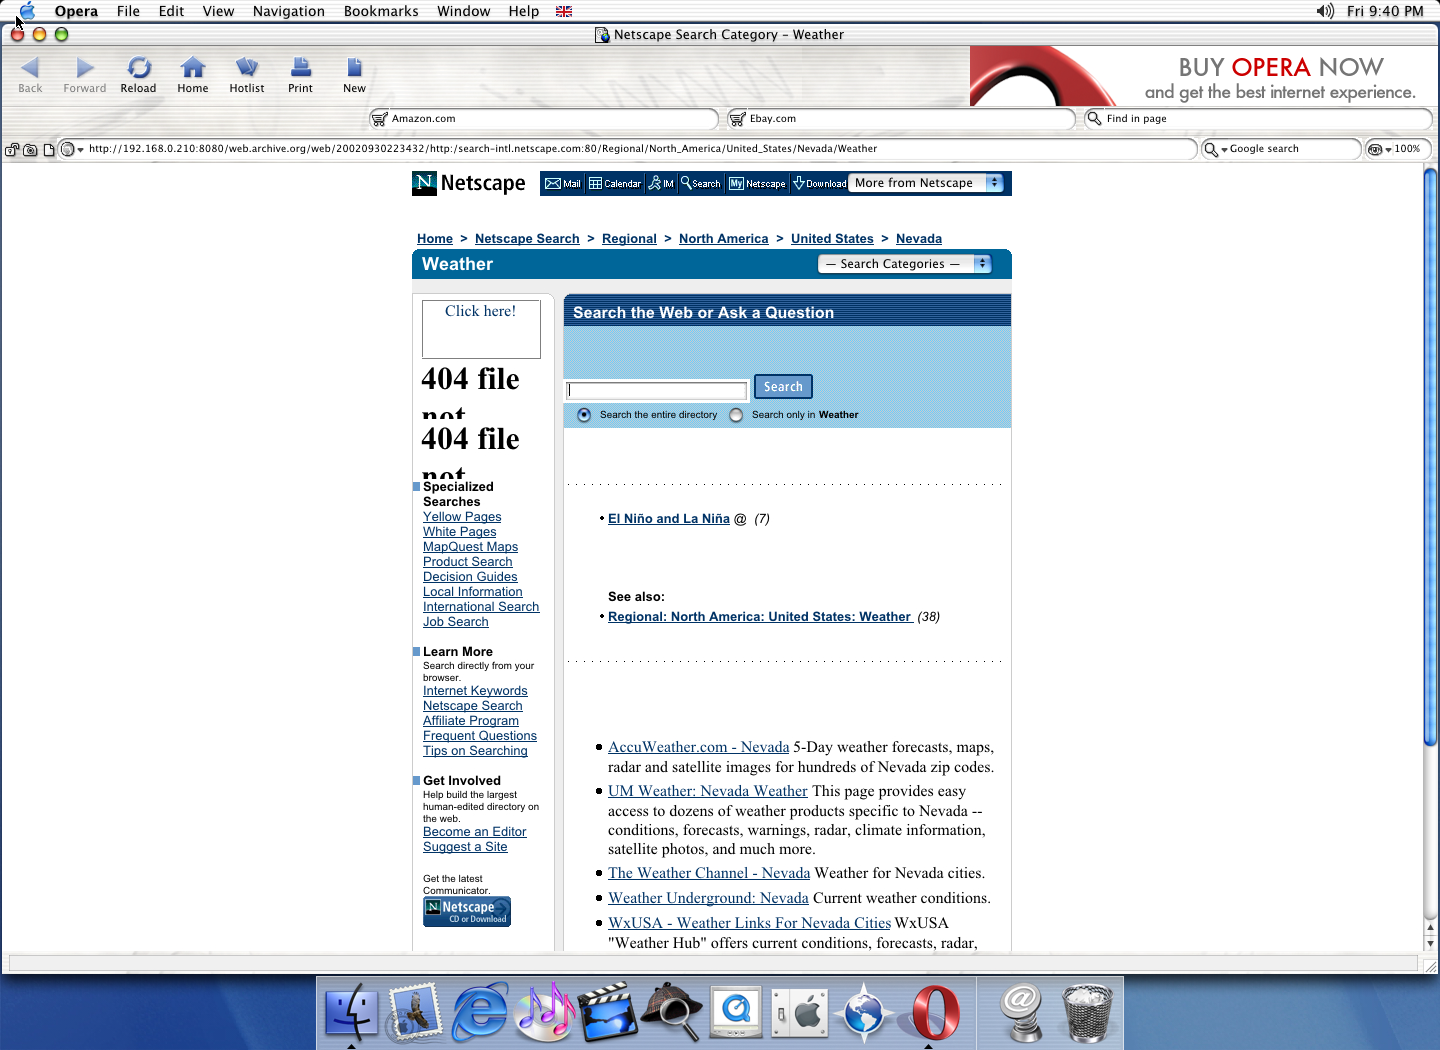 OS X 10.1 PPC with Opera 6.0 displaying a page from Netscape archived at September 30, 2002 at 22:34:32